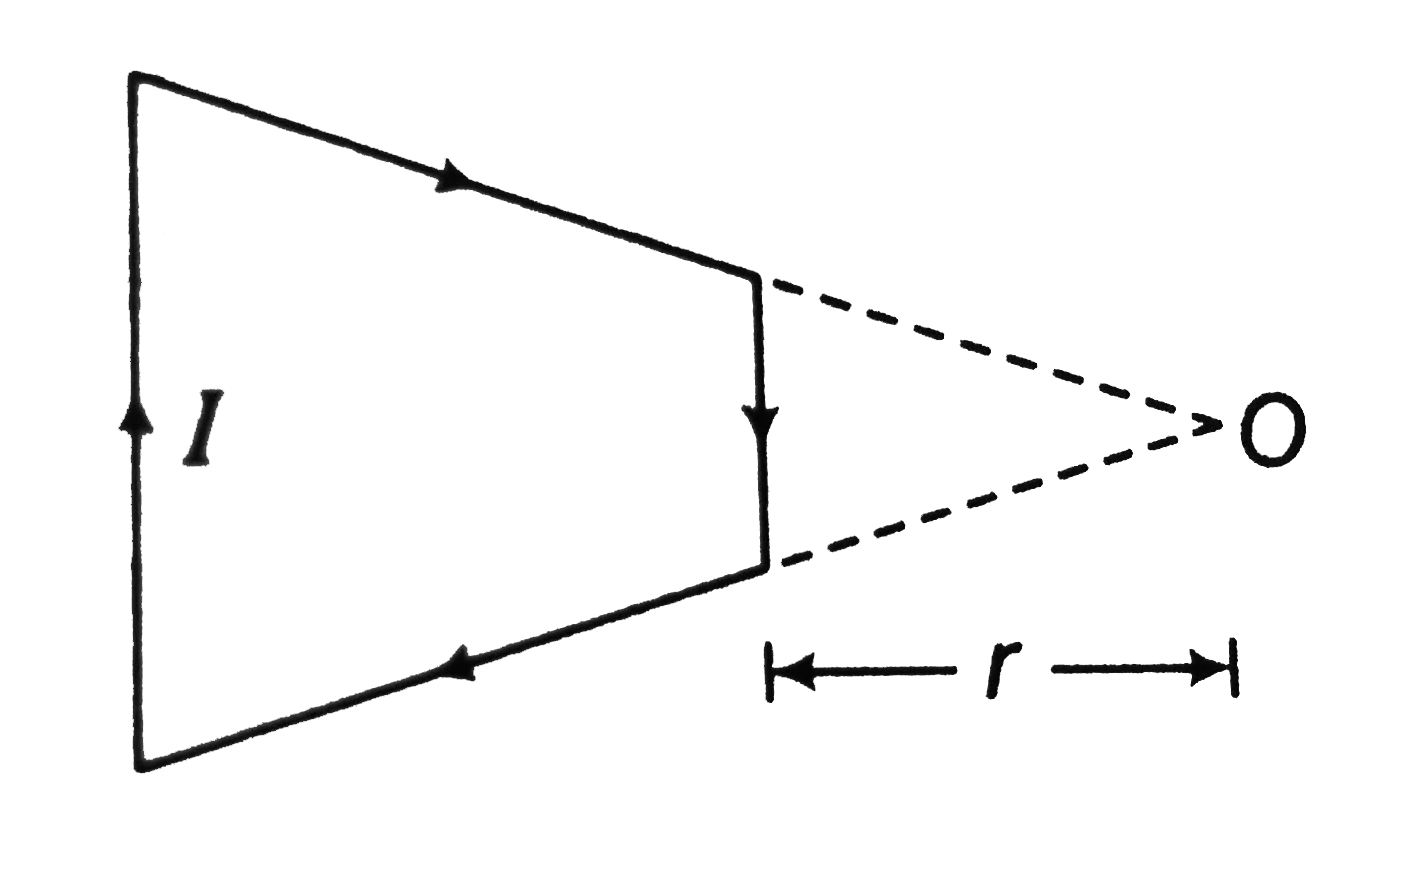 A current I = sqrt2 A flows in a circuit having the shape of isosceles trapezium. The ratio of the bases of the trapezium is 2. Find the magnetic induction B at symmetric point O in the plane of the trapezium. The length of the smaller base of the trapezium is 100 mm and the distance r=50mm.